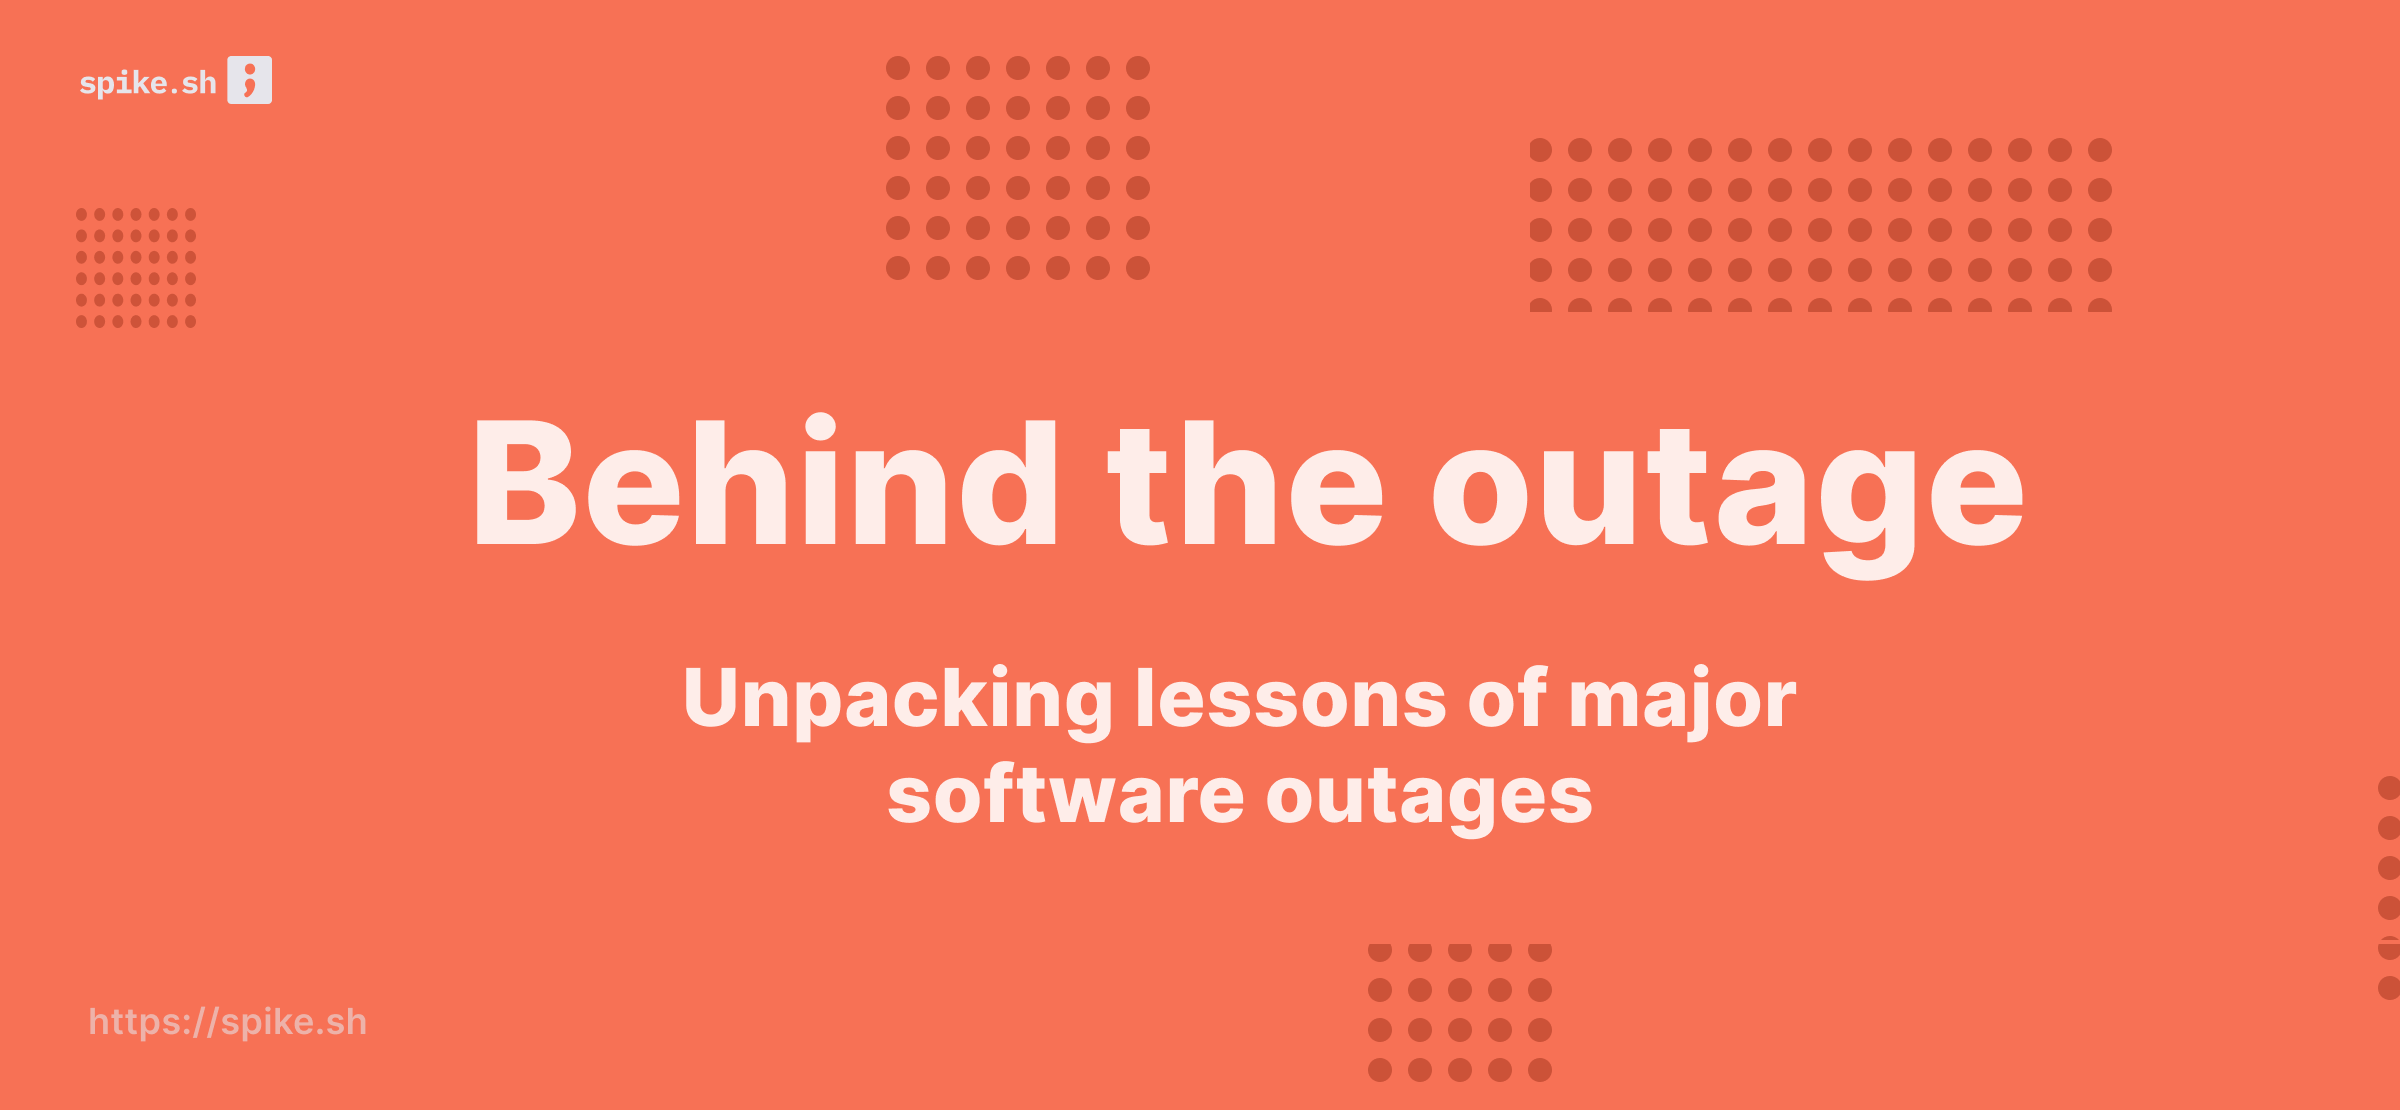 Behind the Outage: Unpacking the Lessons of Major Software Incidents